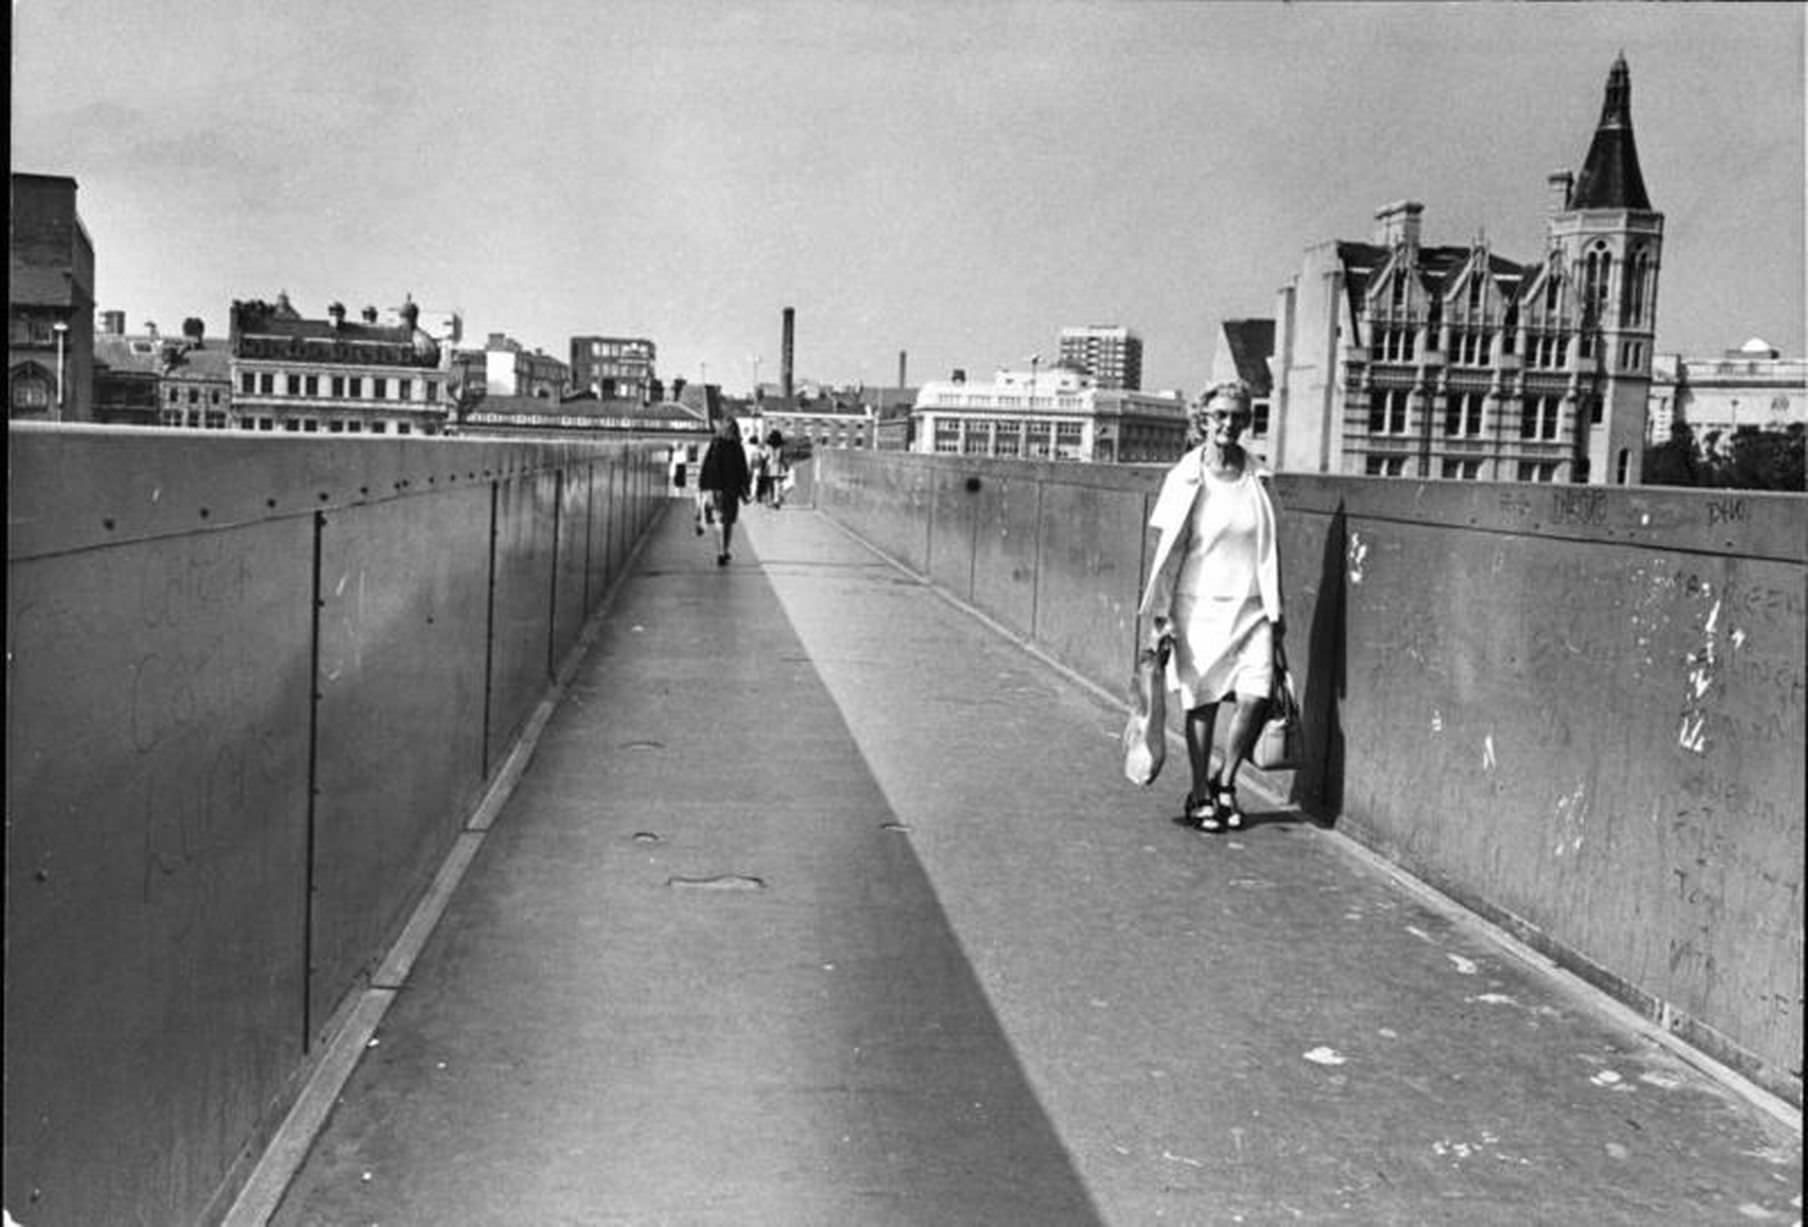 Picture shows pedestrians using the walkway, also known as the sky bridge, in Roe Street, Liverpool city centre.